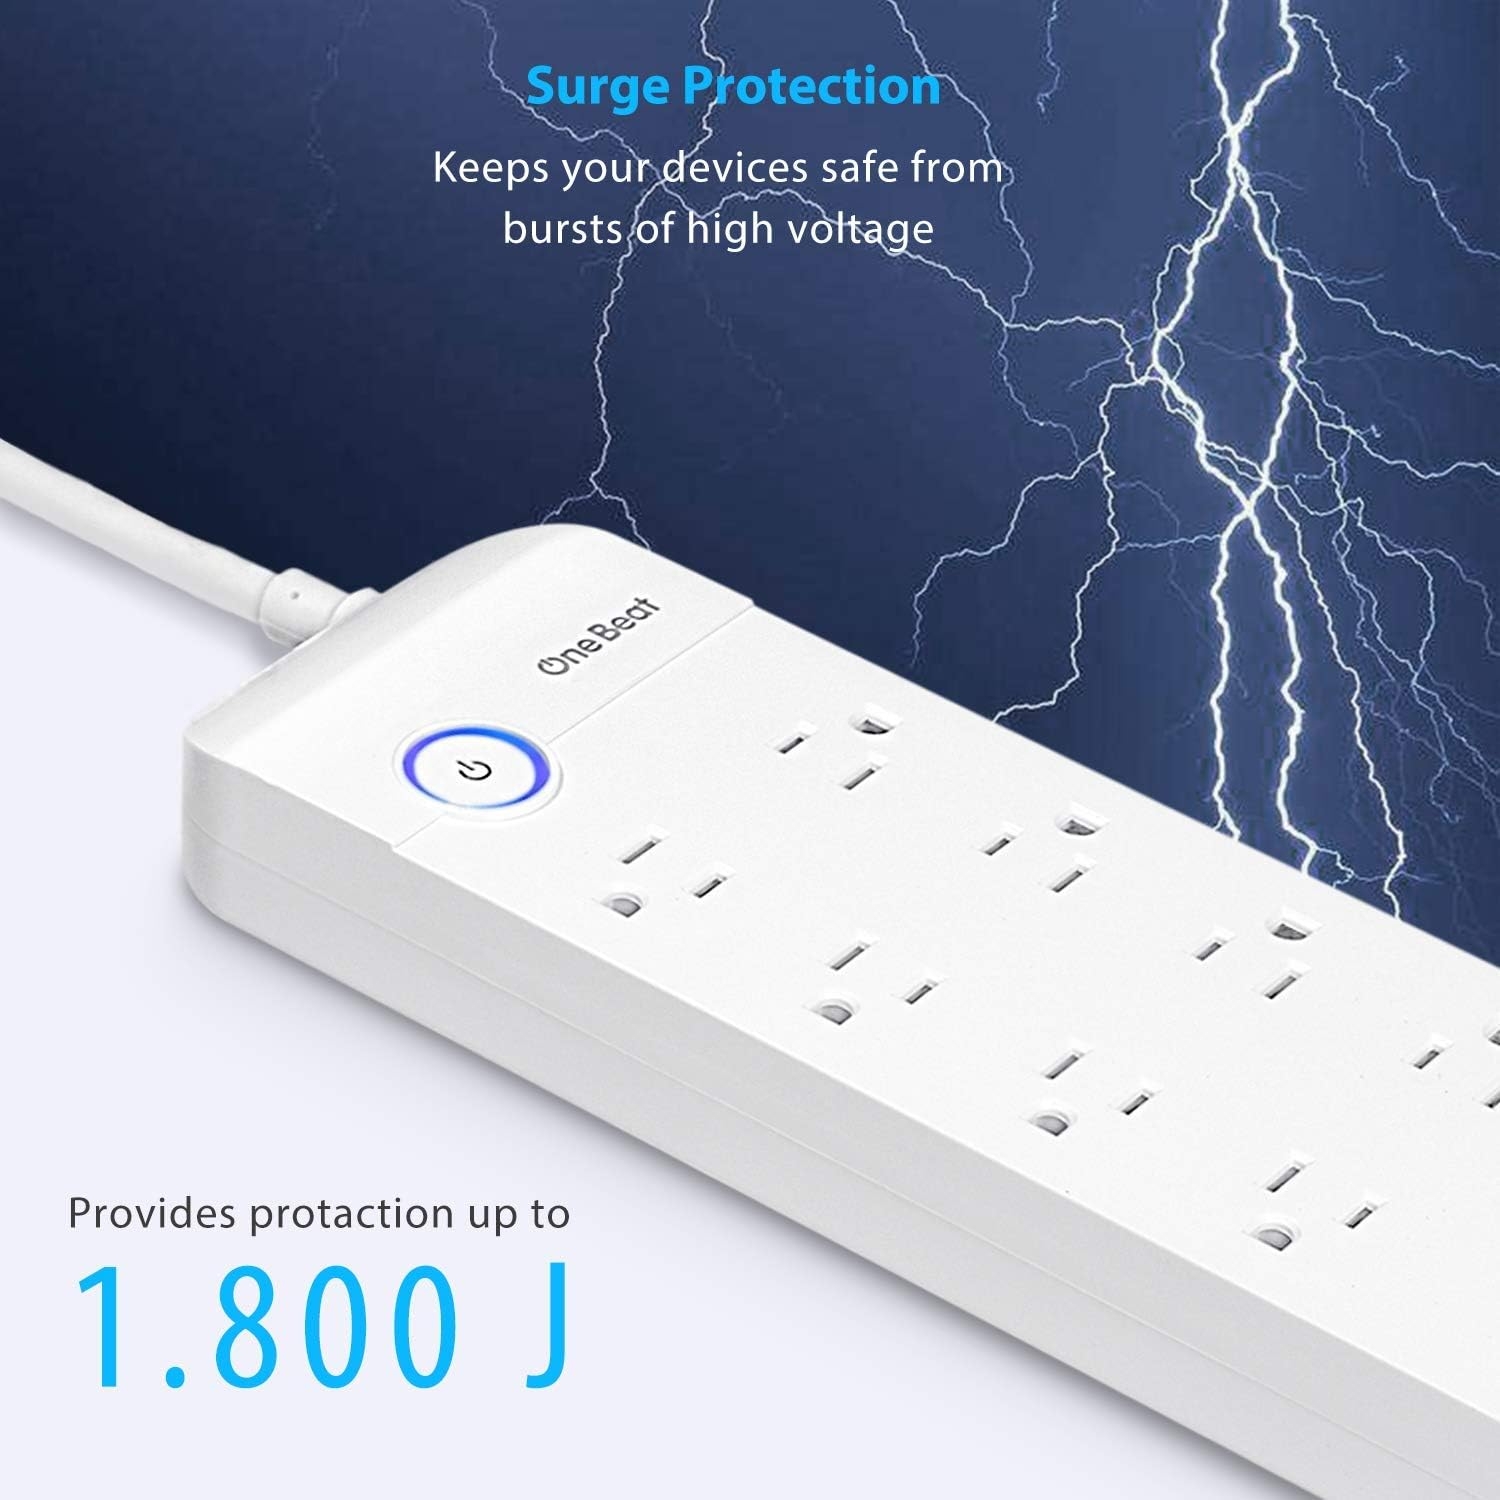 8 Outlets Surge Protector Power Strips with 3 USB Ports(5V/3.1A), 1800 Joules 15A Circuit Breaker, 6ft Extension Cord Flat Plug, Wall Mountable for TV Smartphone Tablets Home Office, UL ETL Listed